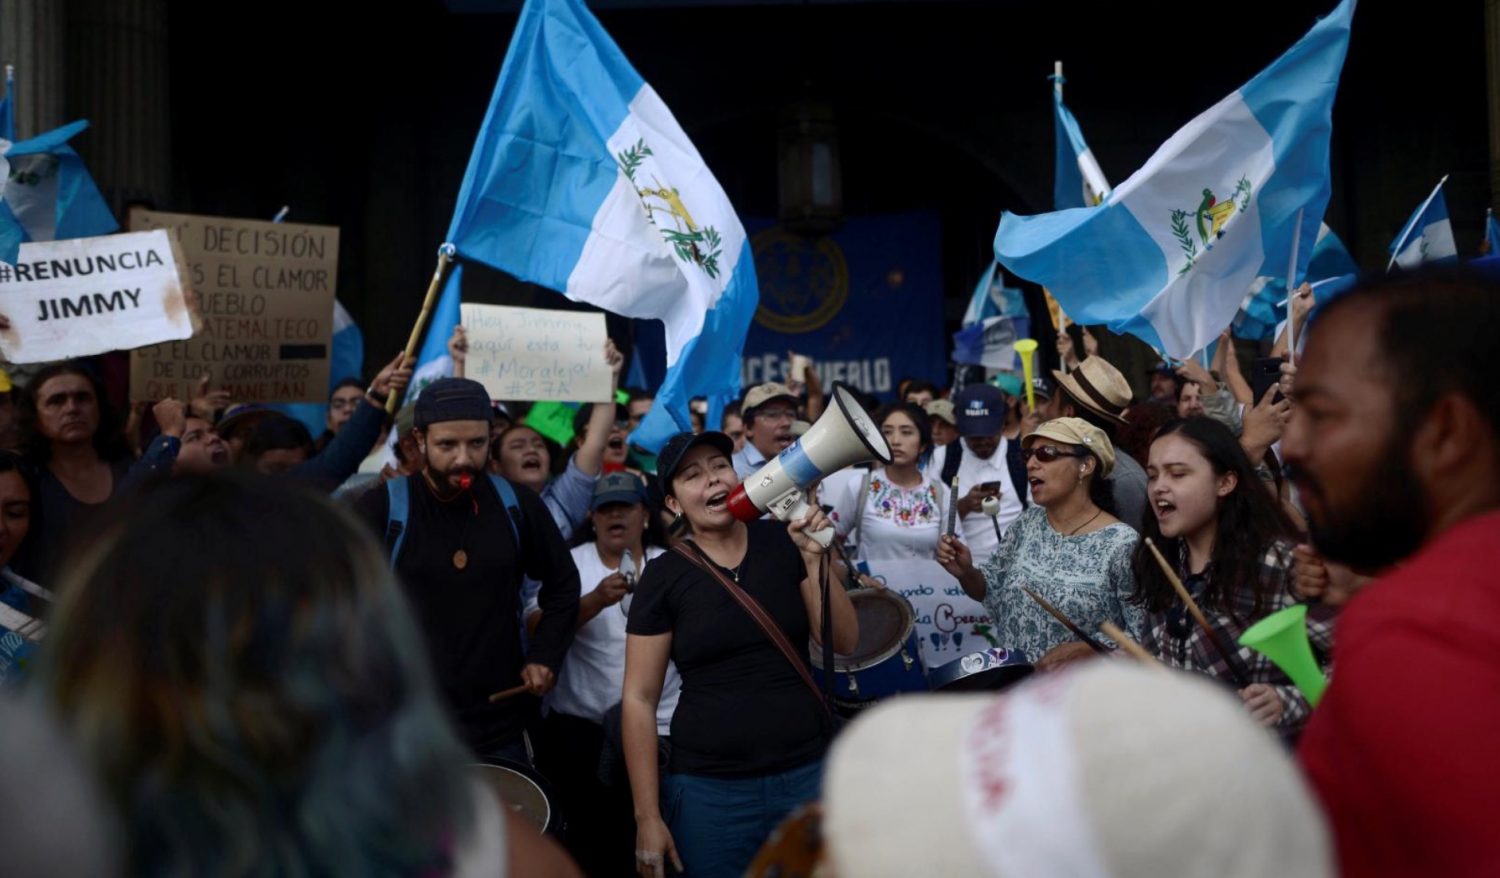 Demonstrators protest against Guatemalan President Jimmy Morales in front of the National Palace in Guatemala City, Guatemala, August 27, 2017.
Fabricio Alonzo (Reuters photo)
